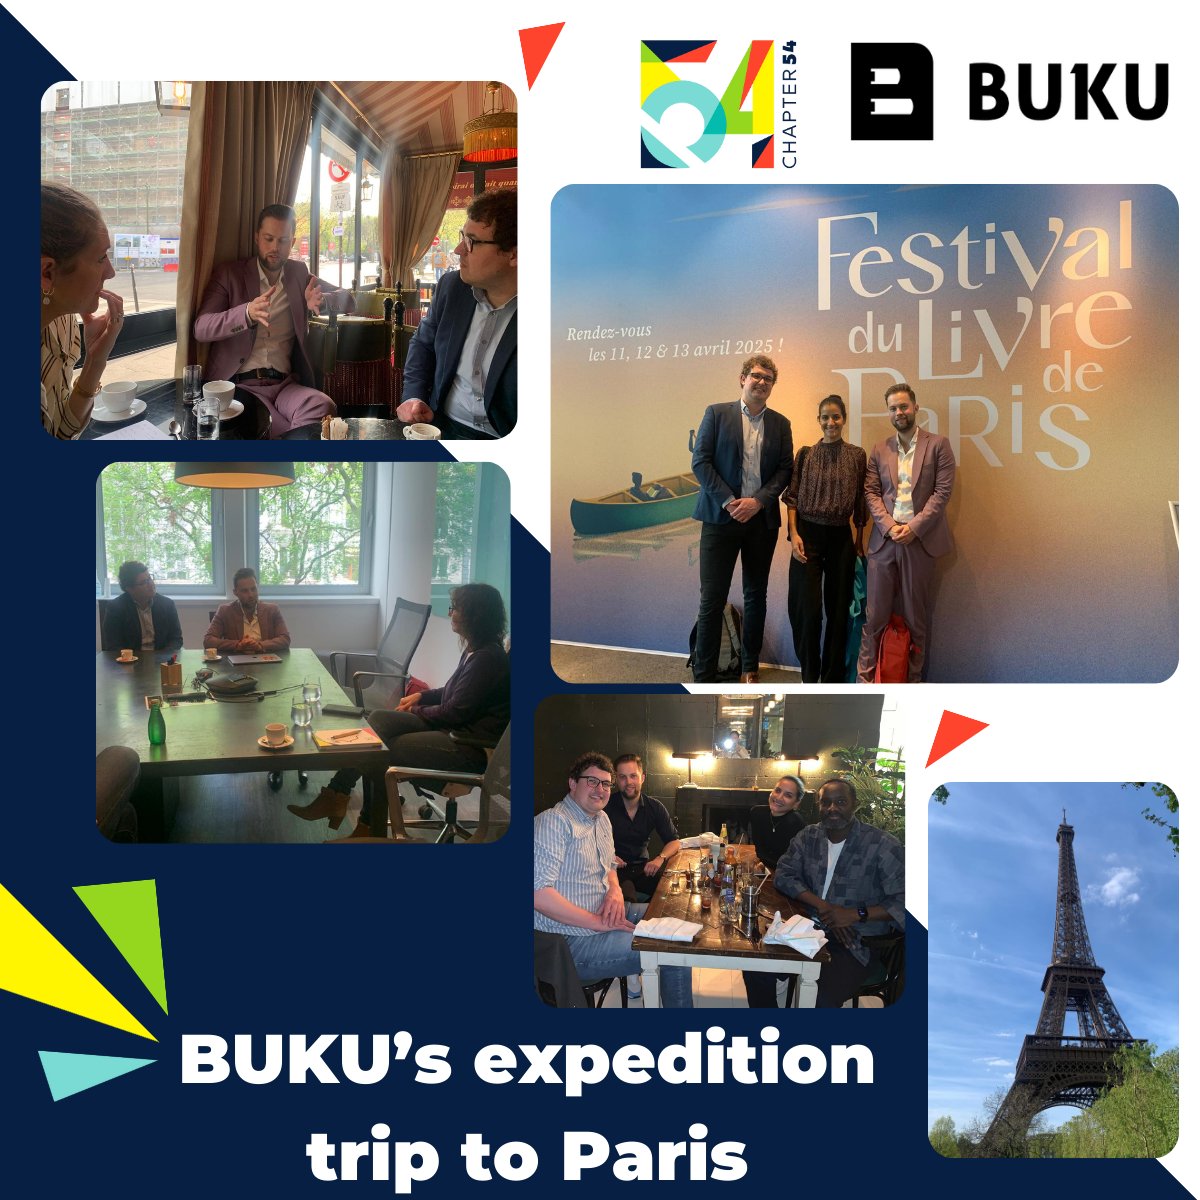 Flashback to Buku's Parisian stint! Buku, a Dutch EdTech company, offers students unlimited access to a digital library of university textbooks at an affordable price.📚 With the team they met future partners, including at the Paris Book Festival. Ready for Africa expansion! 🌍